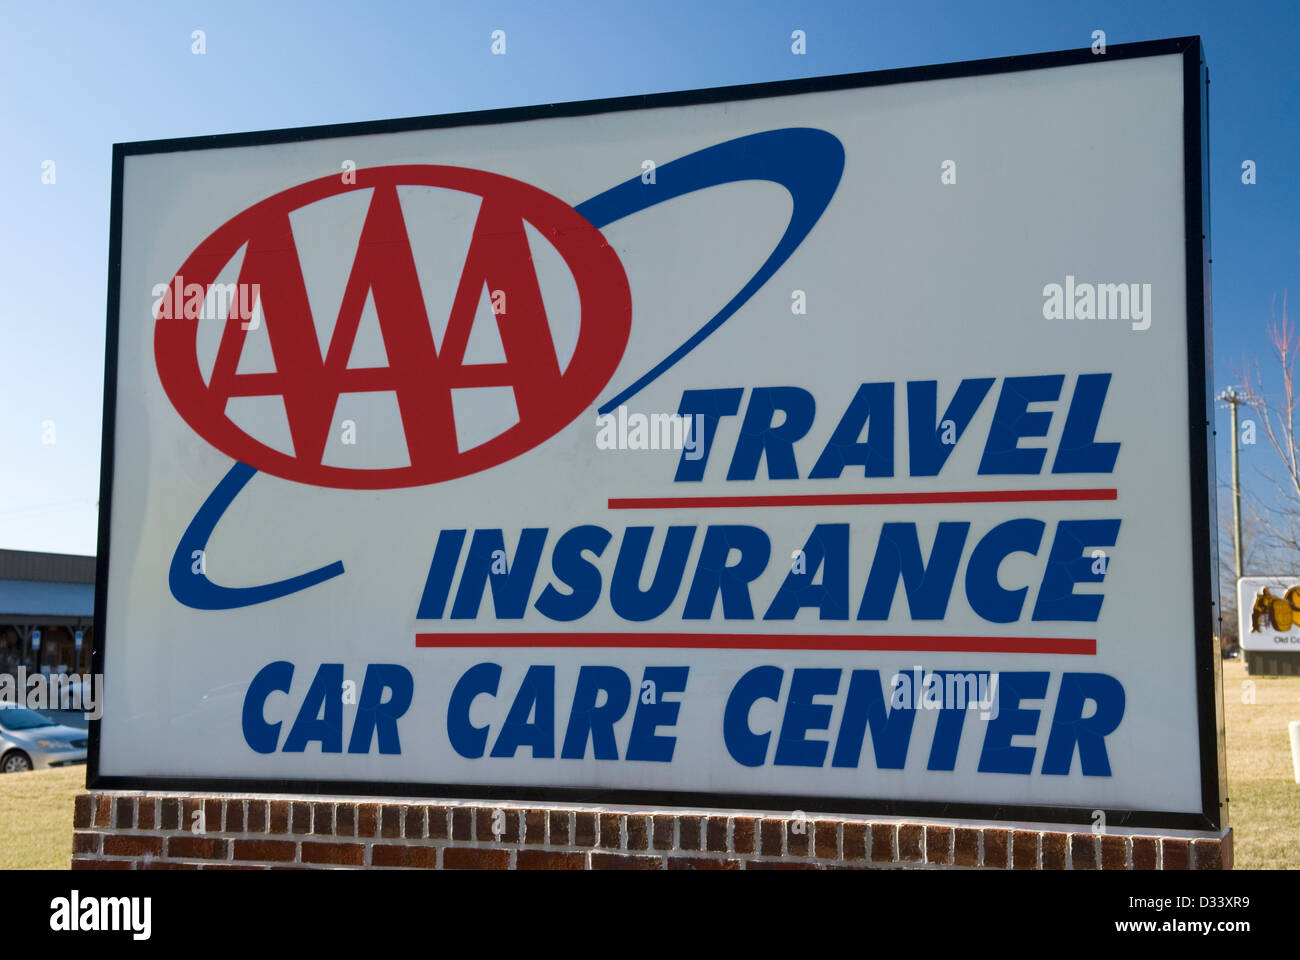 Assurance voyage AAA Car Care Center USA. Banque D'Images